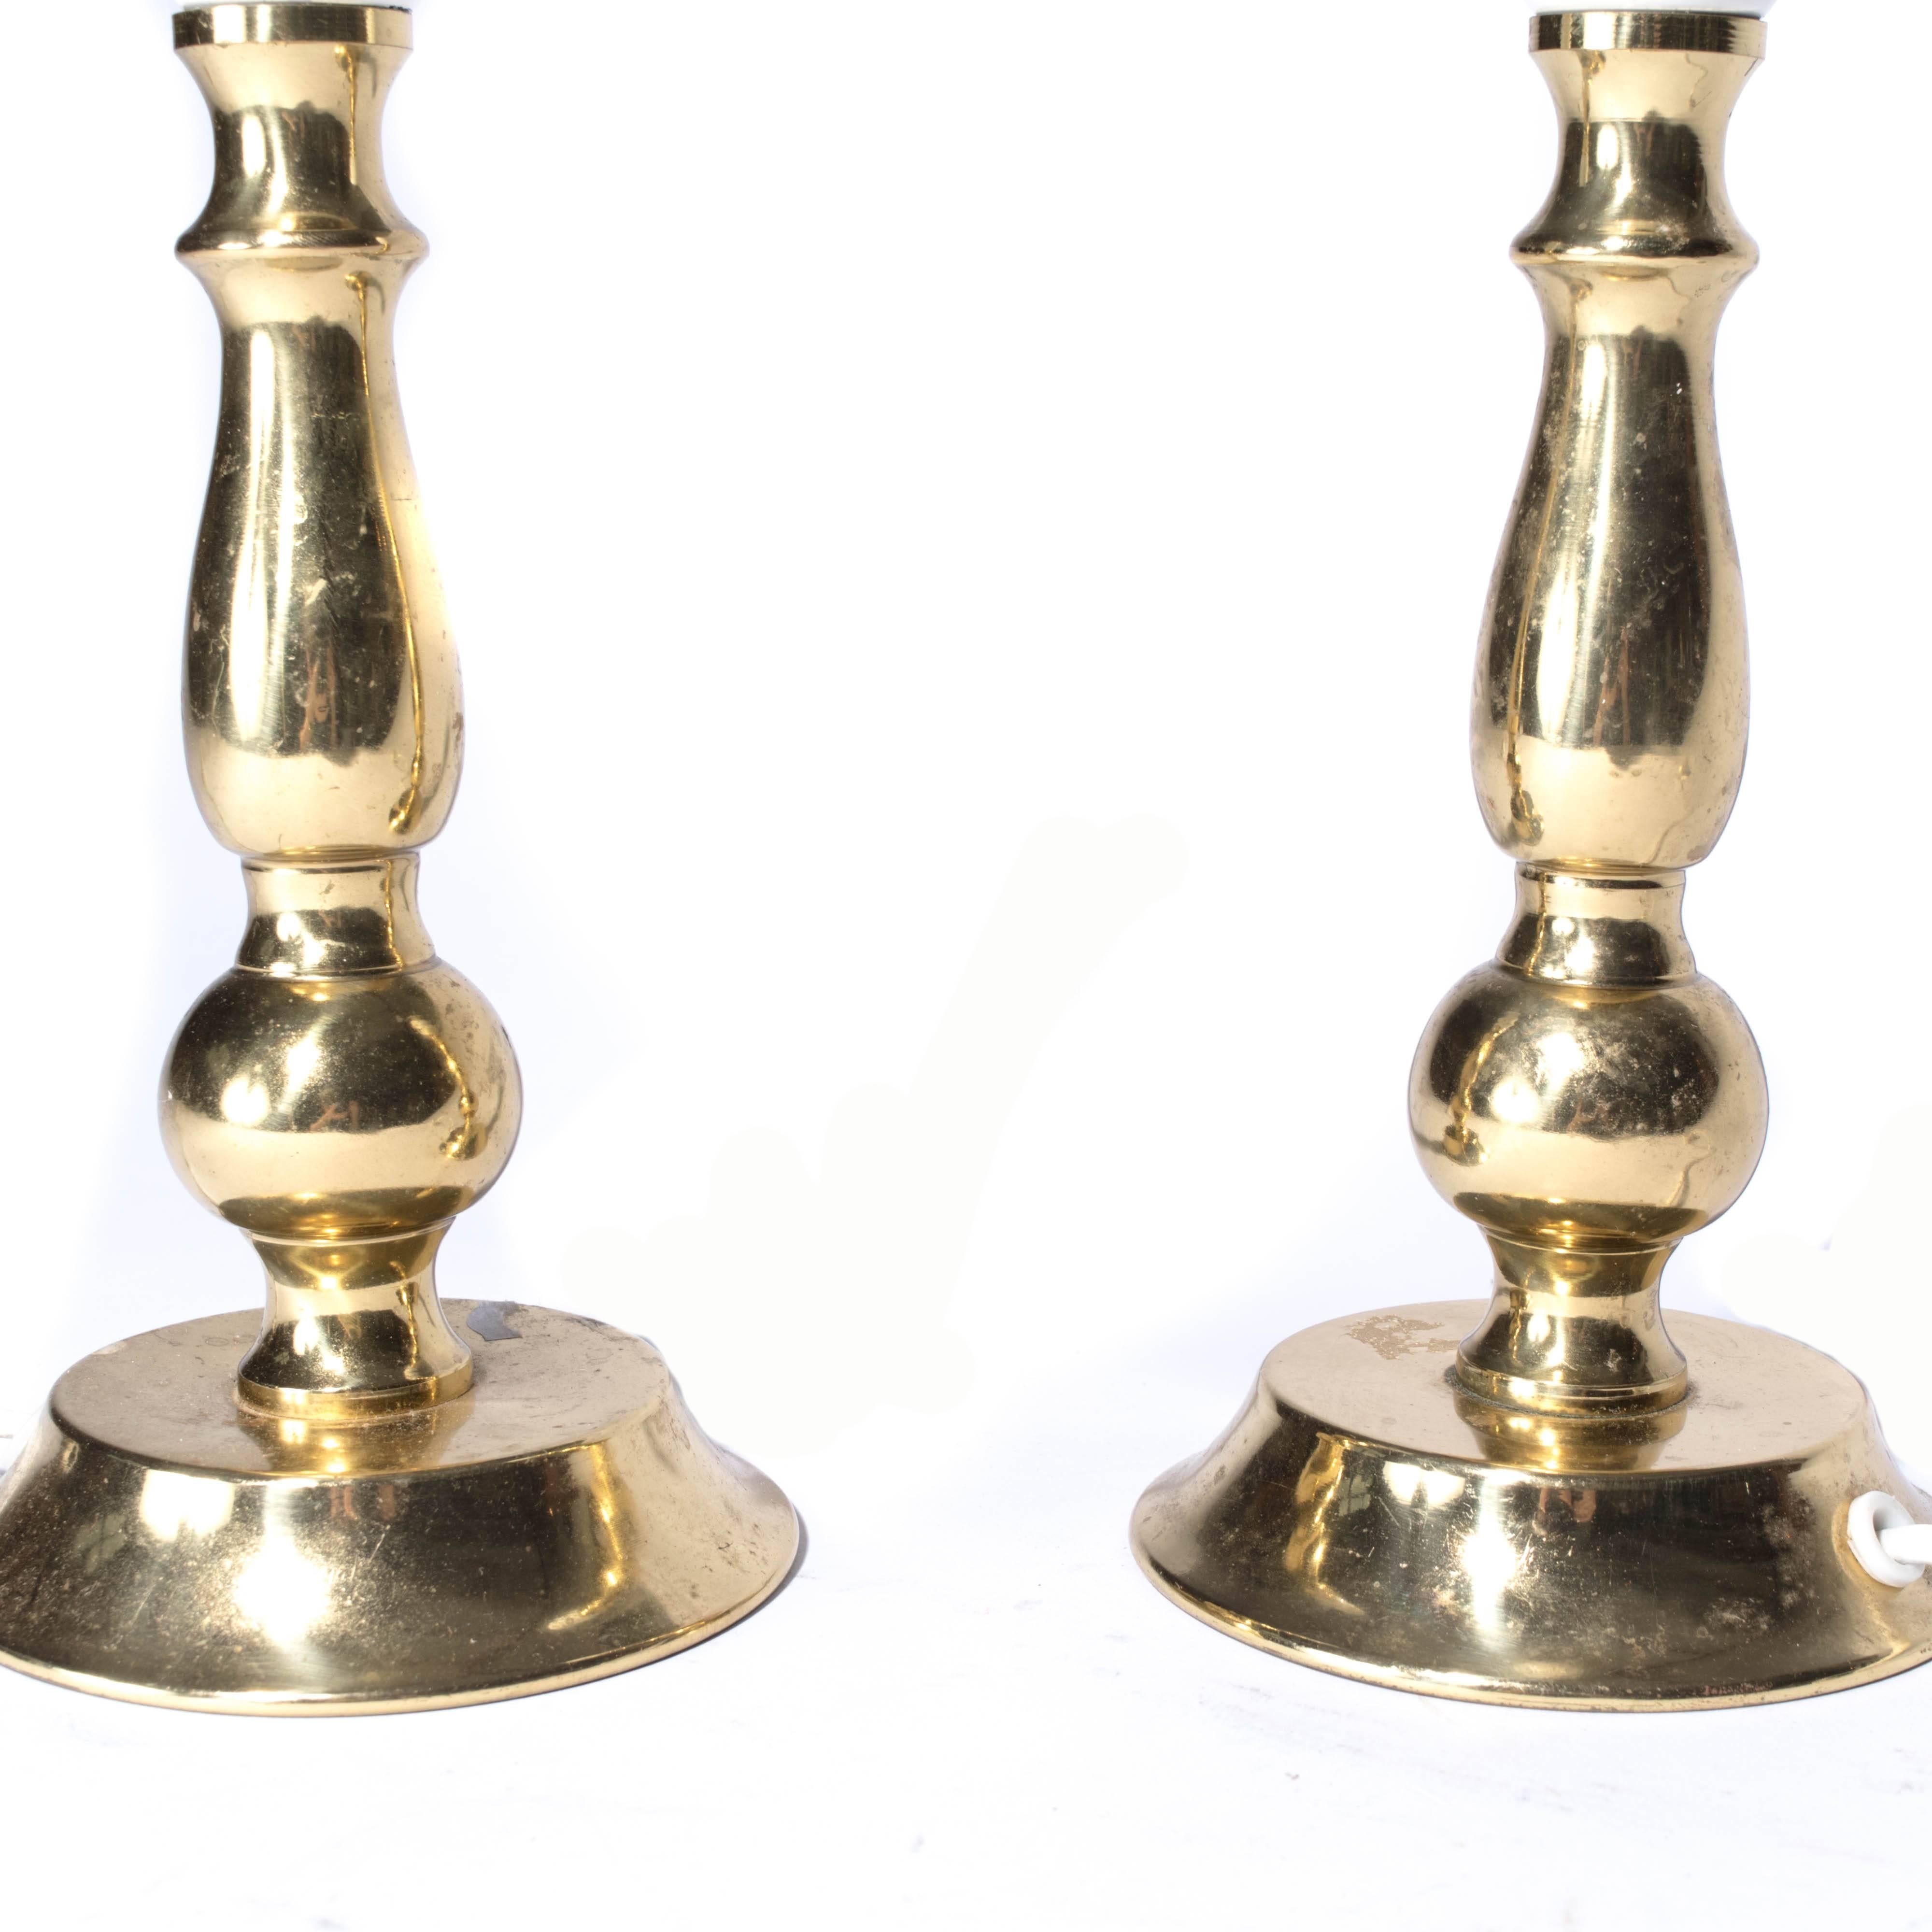 Scandinavian Modern Midcentury Table Lamps from Sweden in Brass For Sale